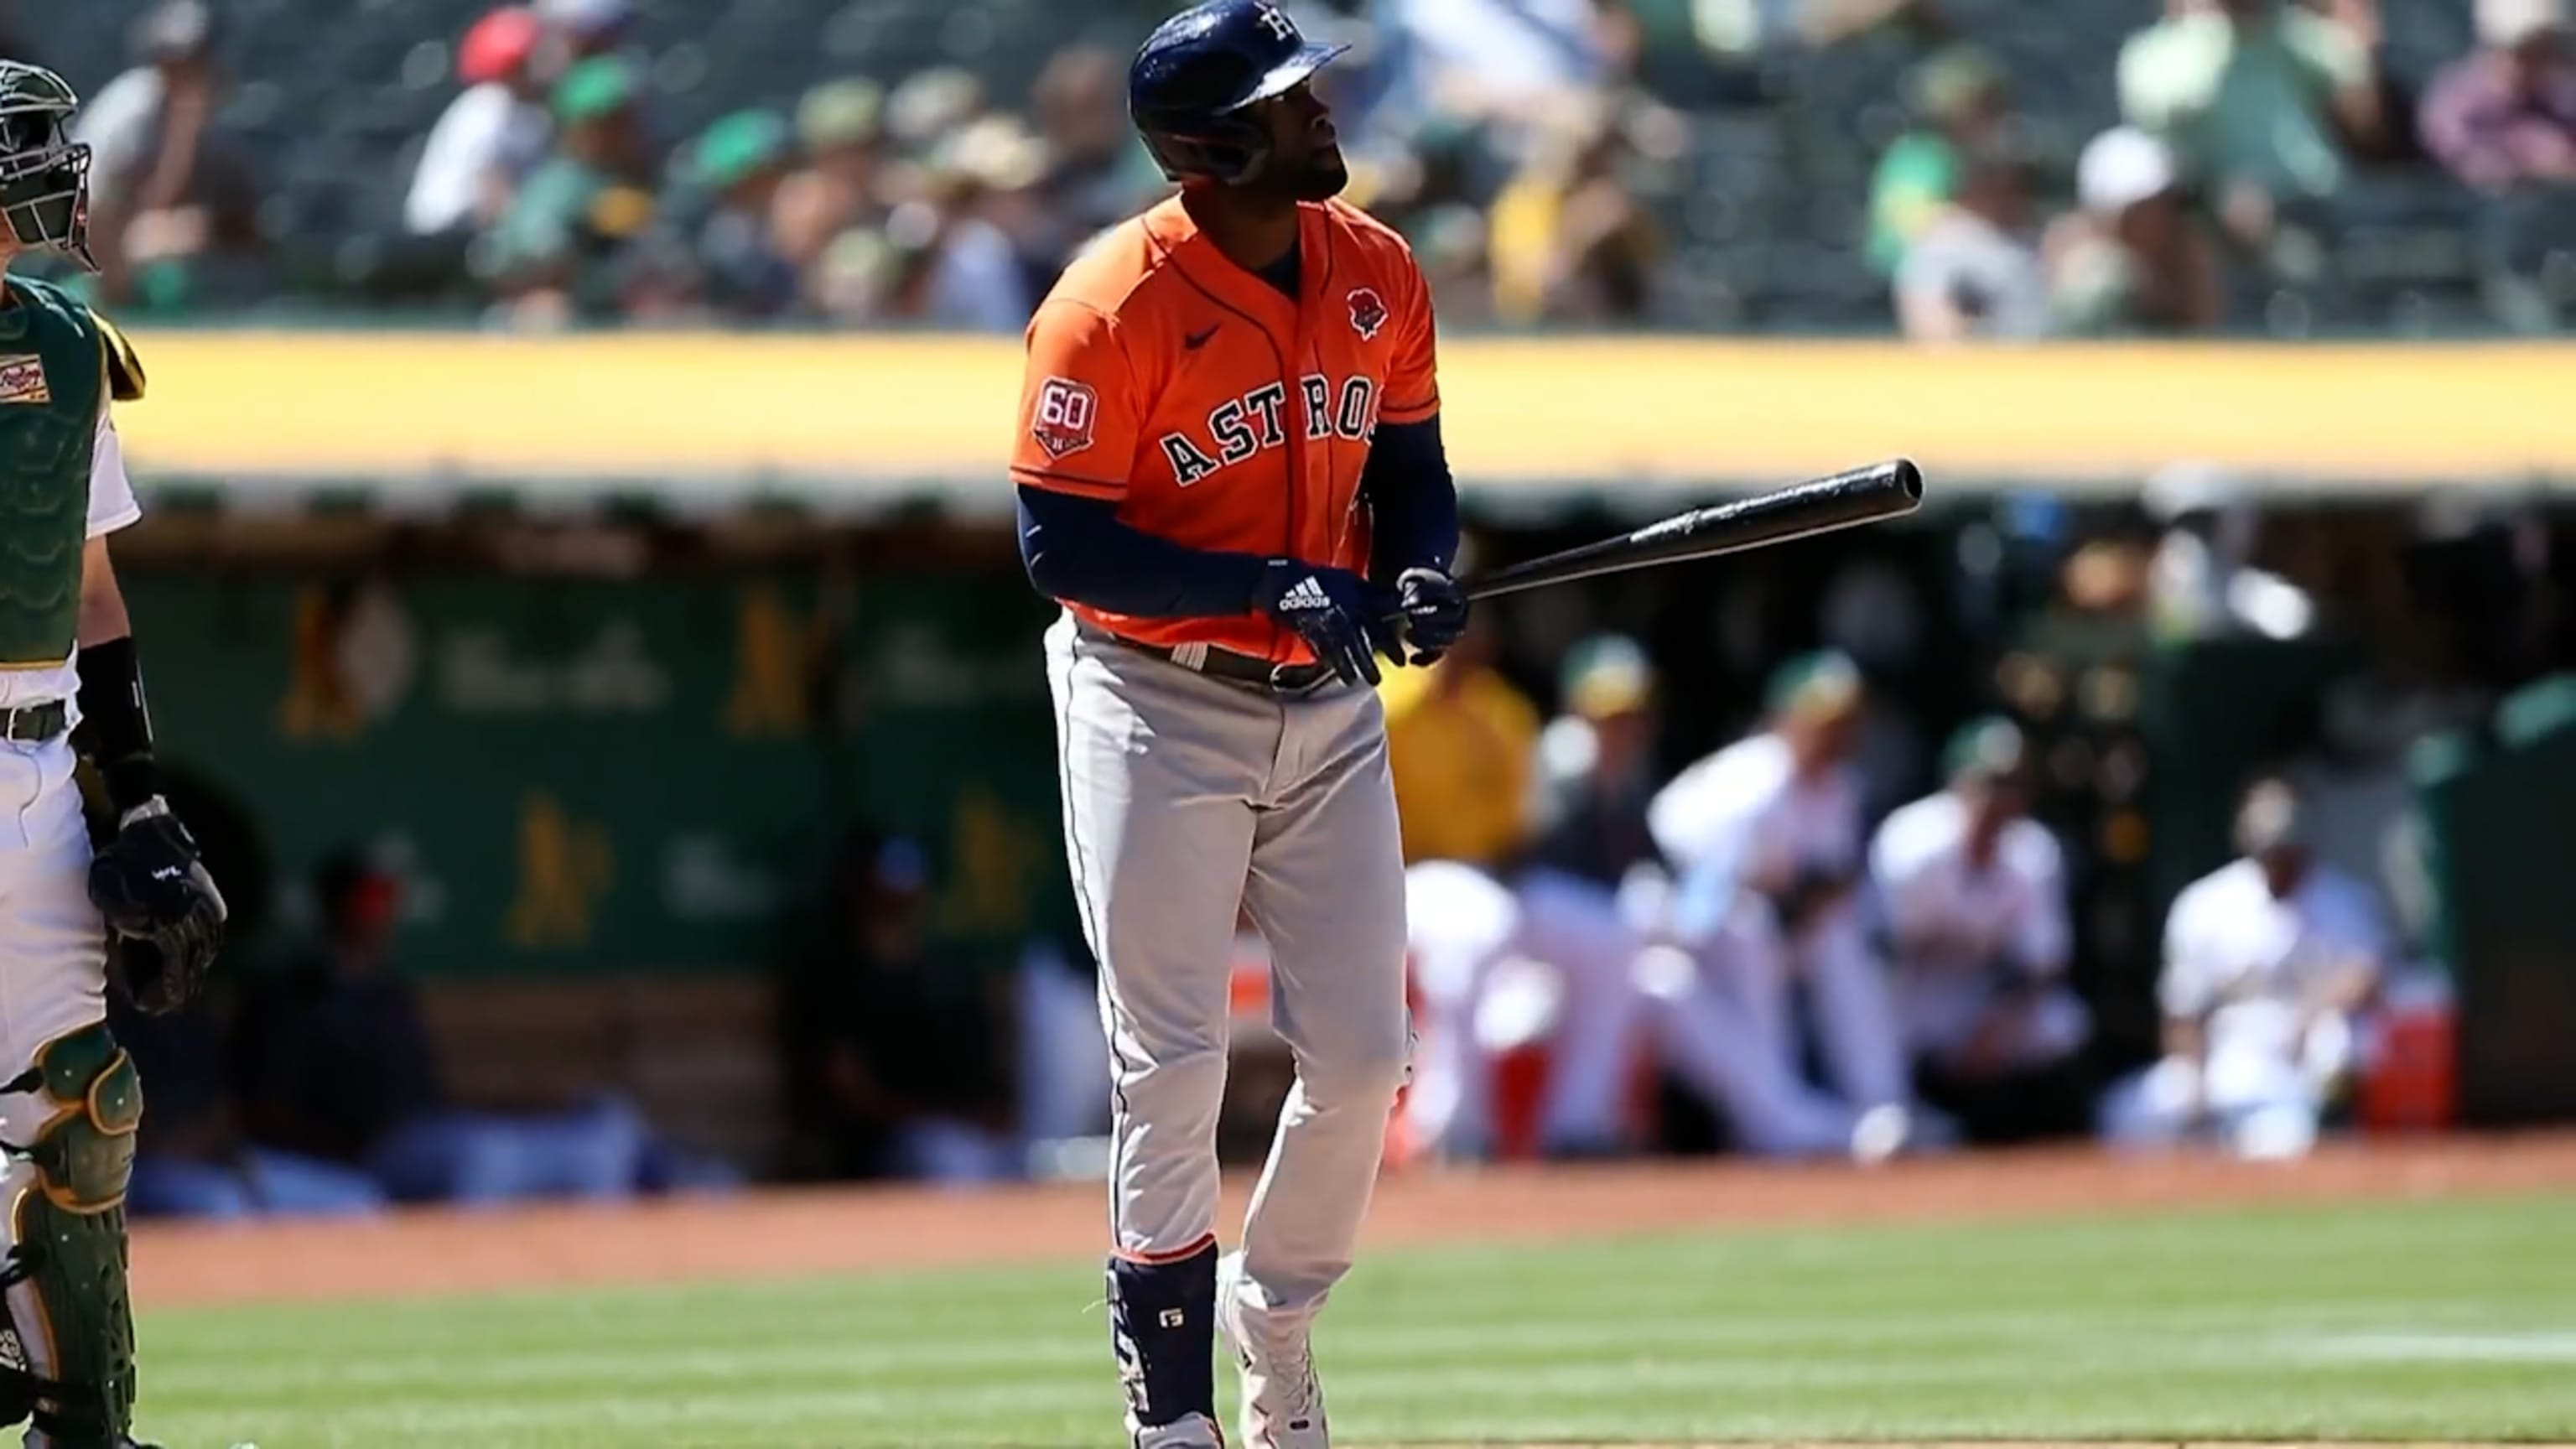 Yordan Alvarez CRUSHES second homer of the game to put Astros up 6-4